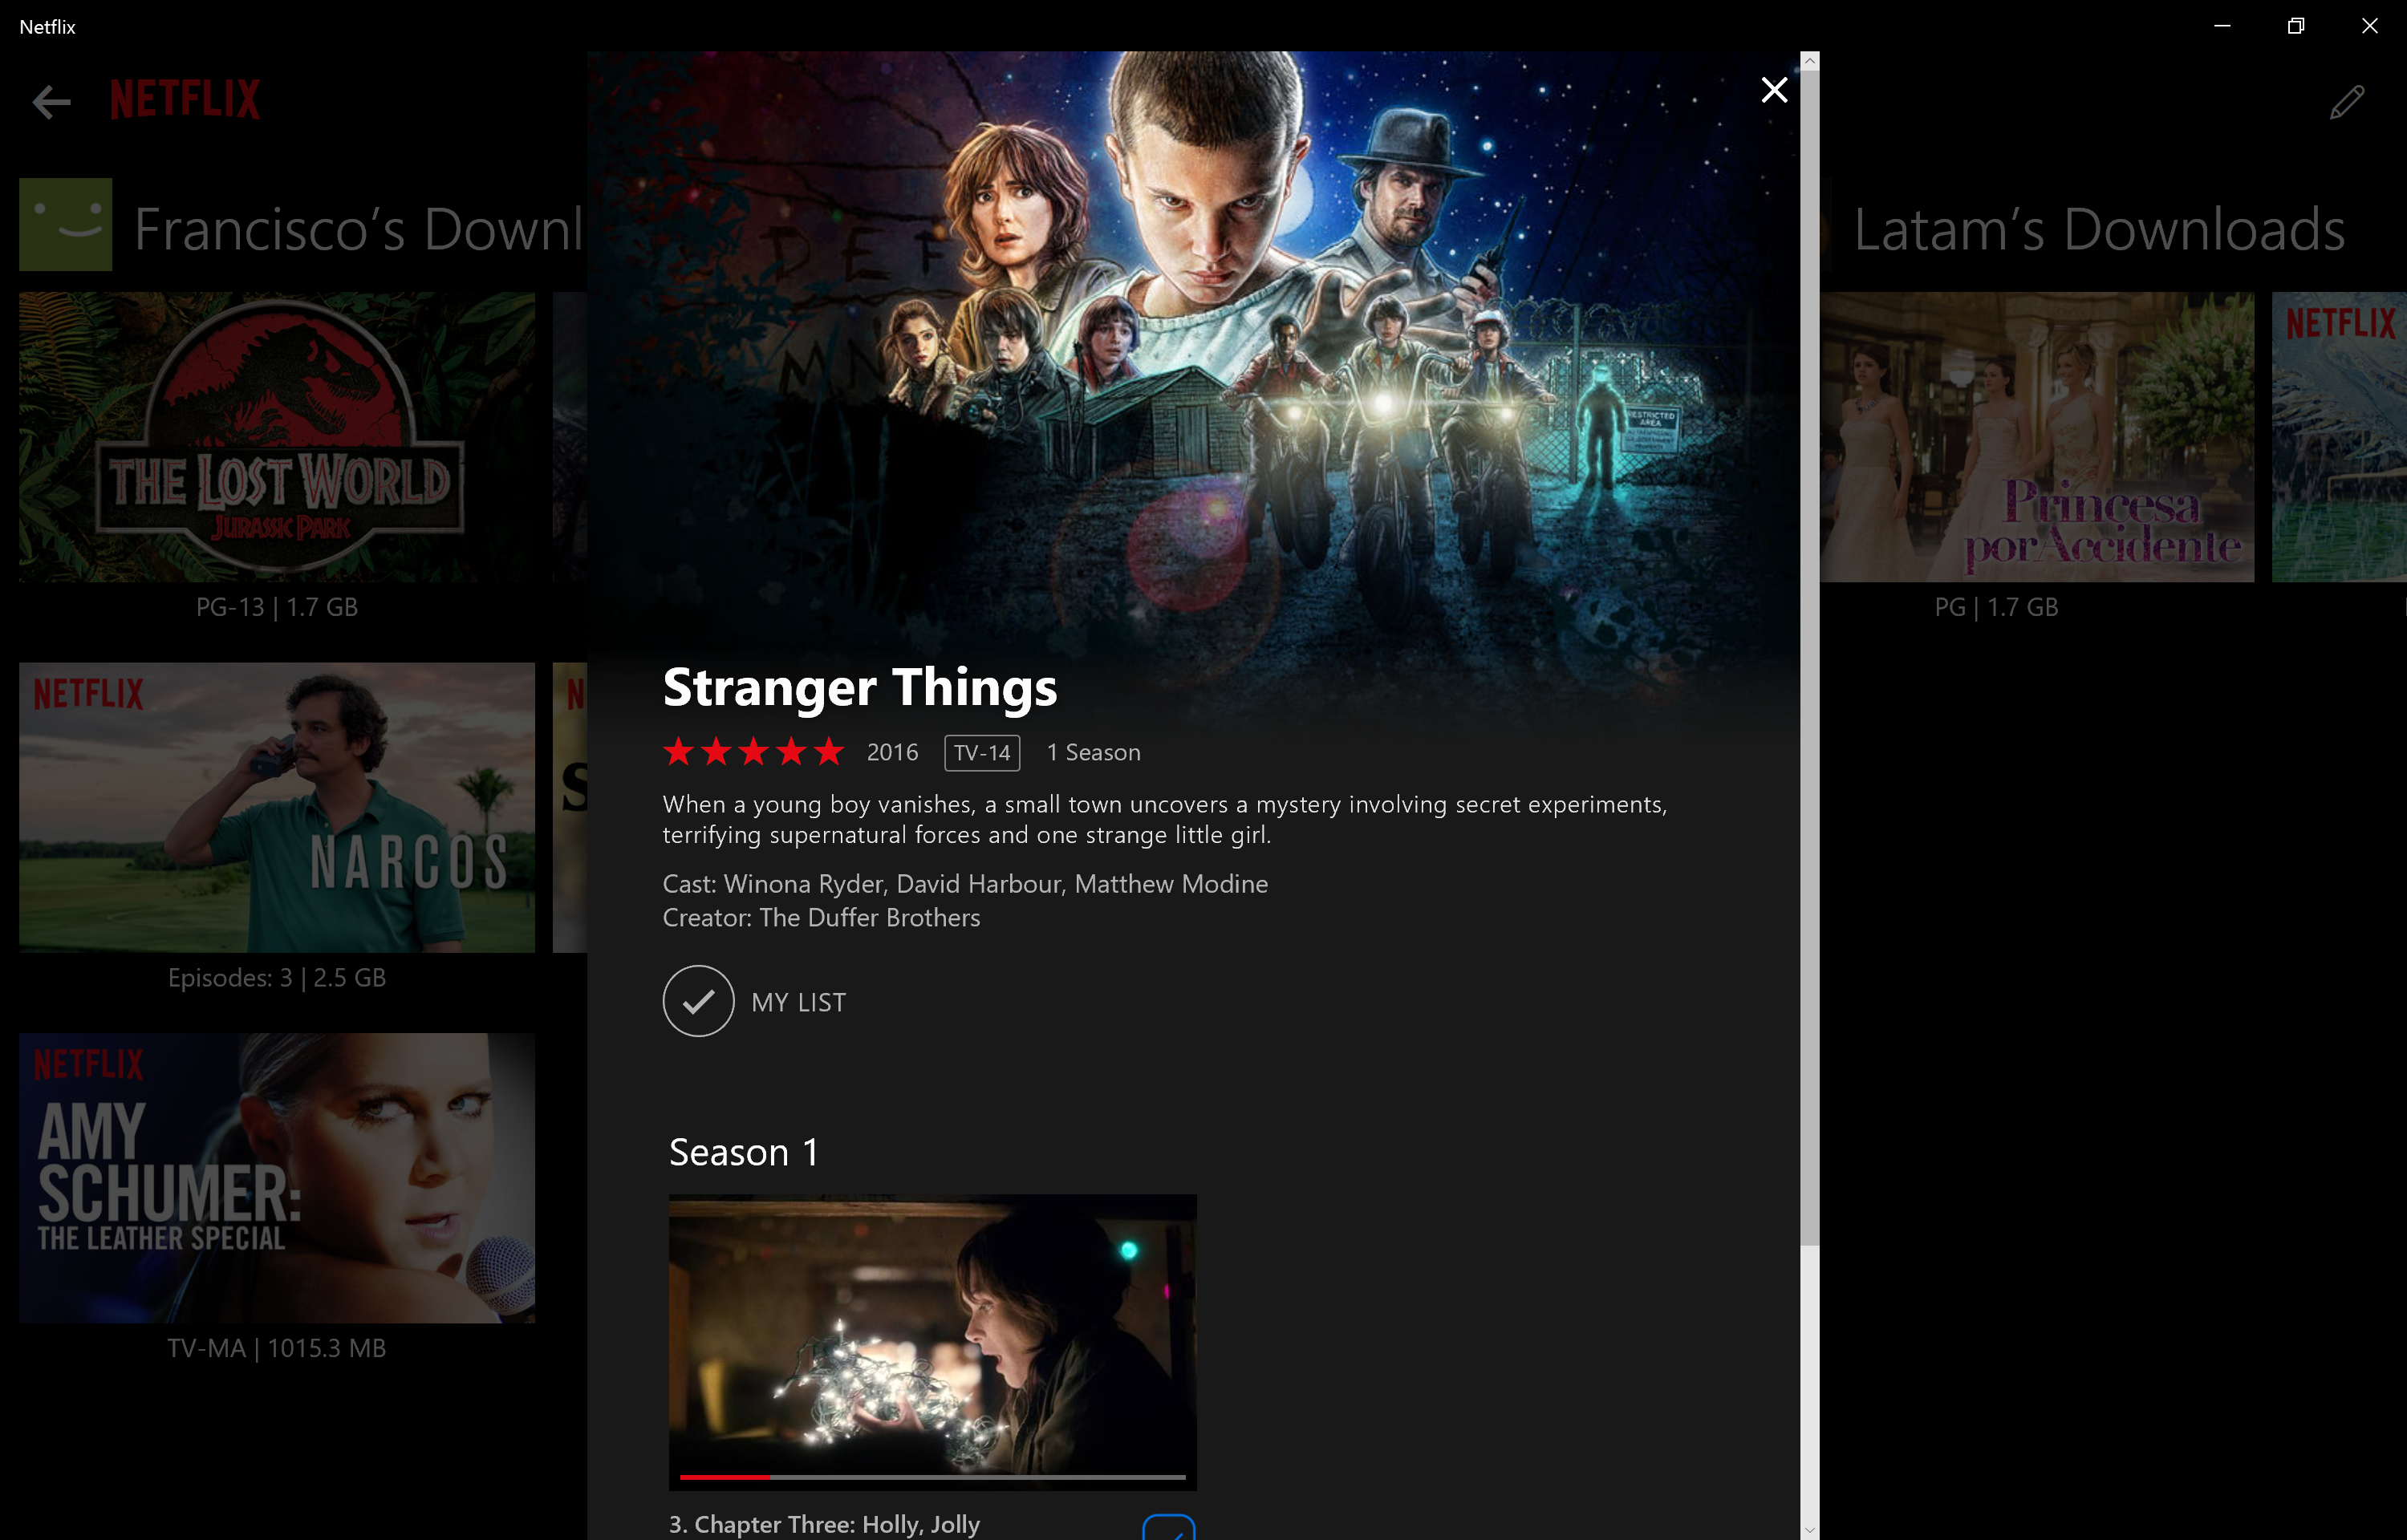 Download Tv Shows And Movies From Netflix To Your Windows 10 Pc Windows Experience Blog